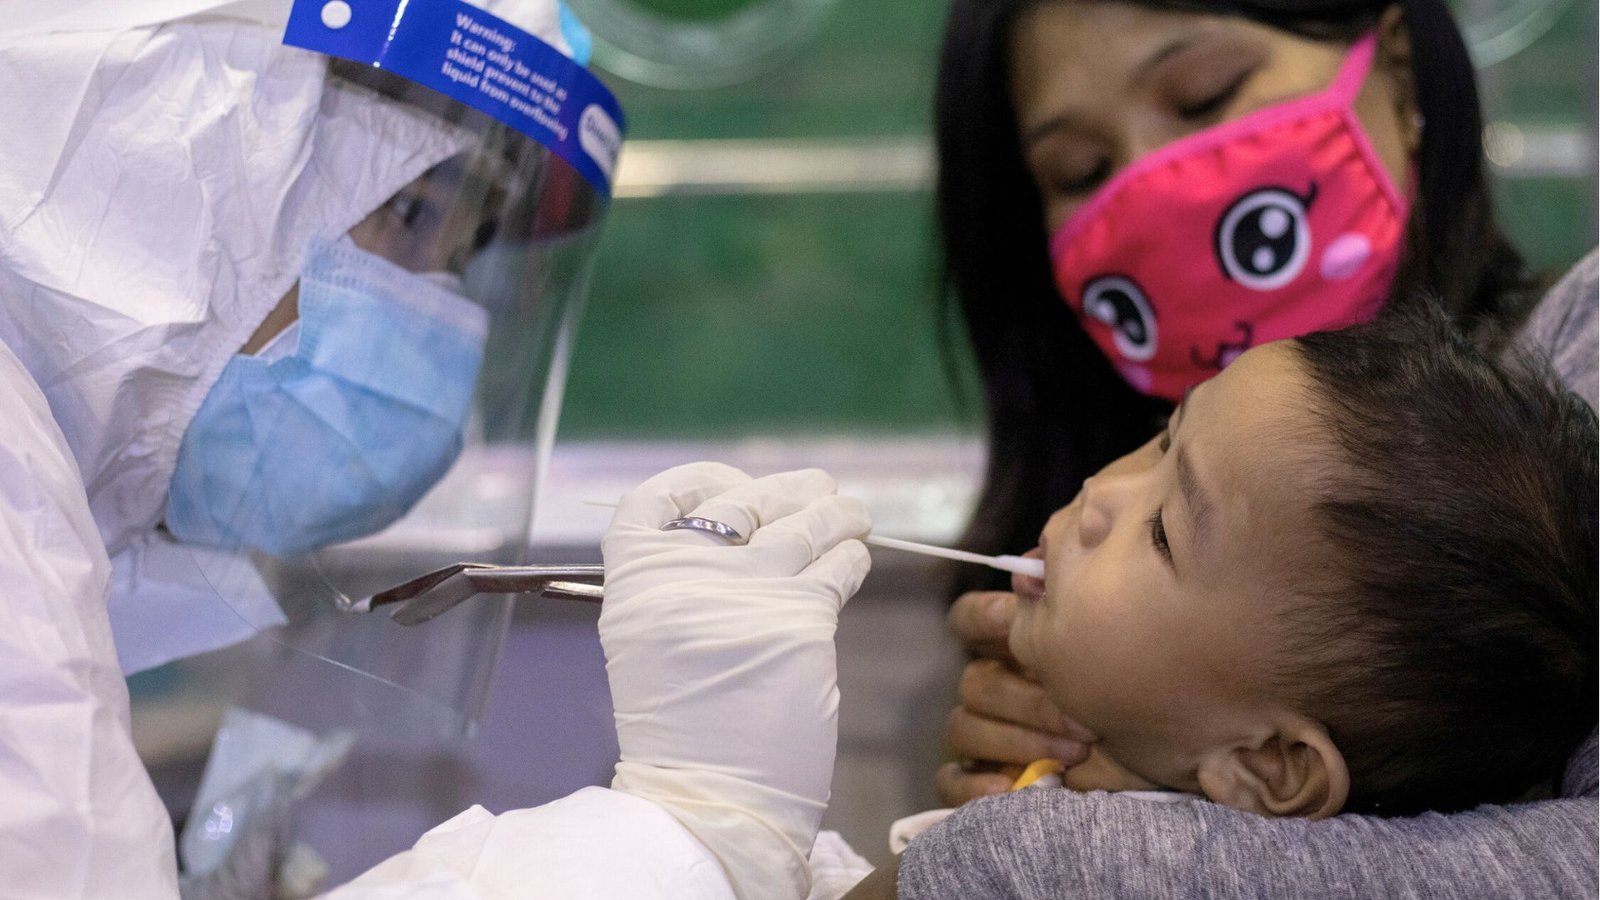 Philippines plans vaccination drive as whooping cough outbreak claims lives | Health News